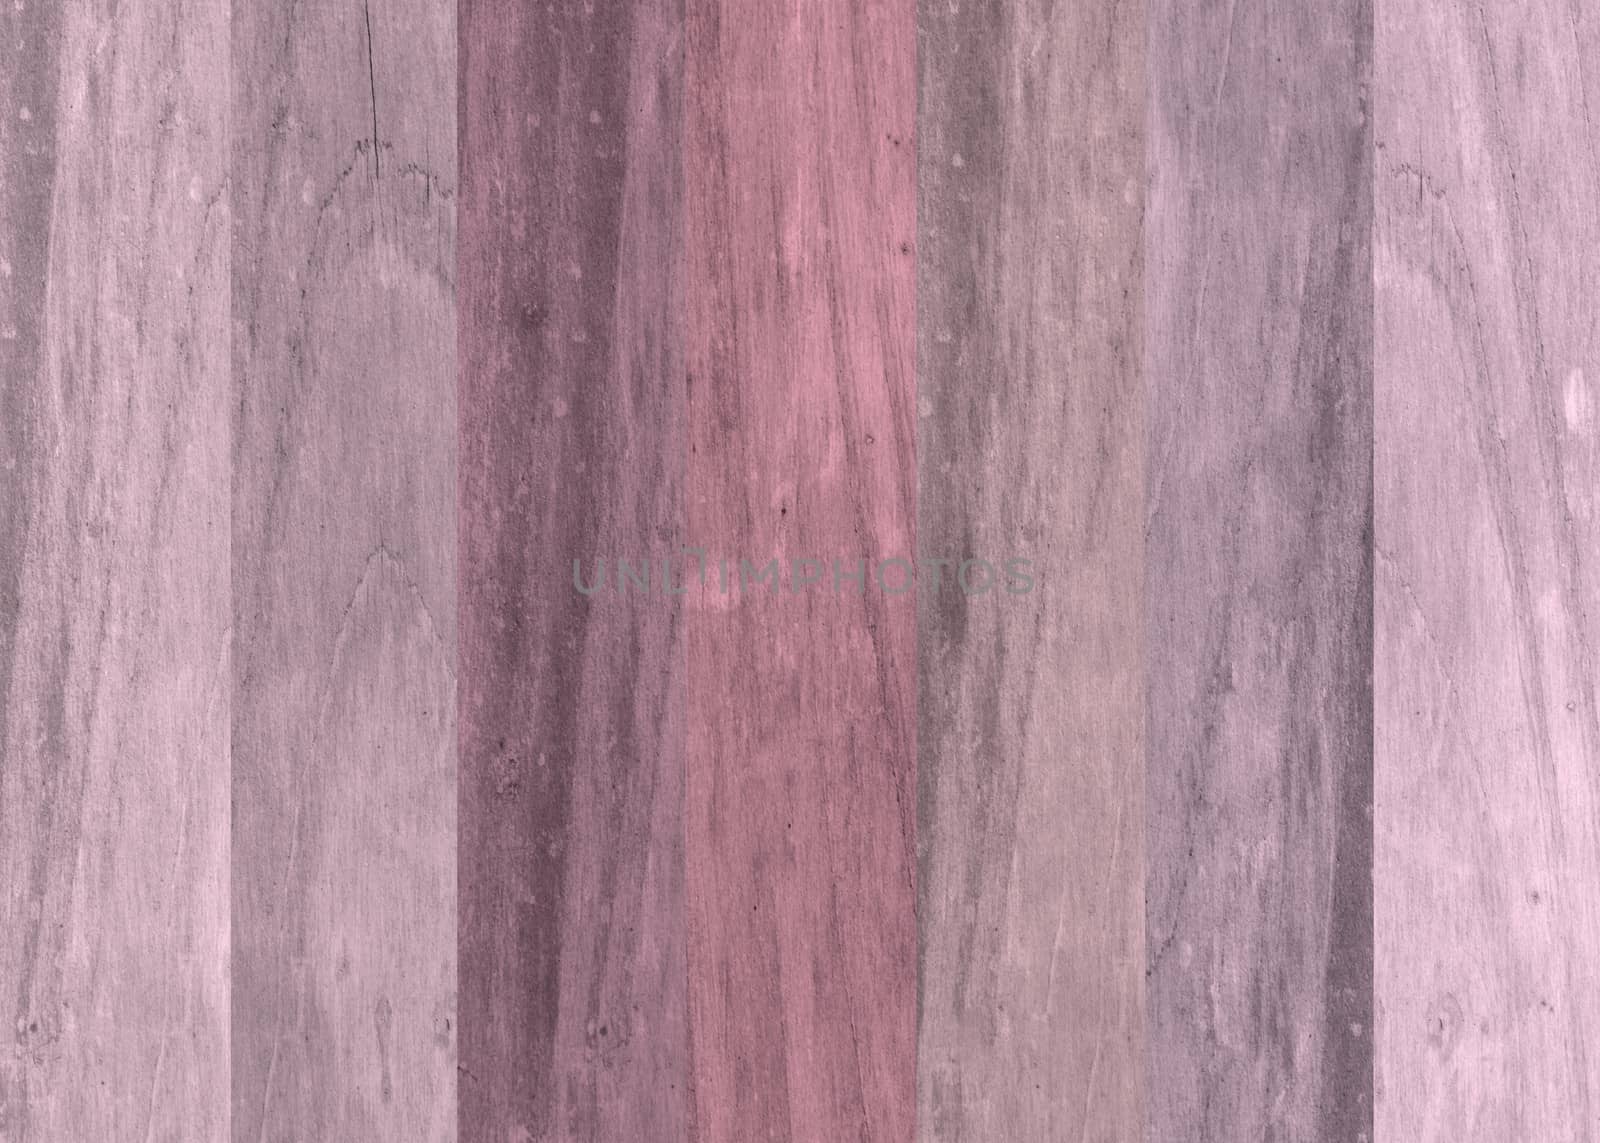 pink weathered and wooden background with distressed texture